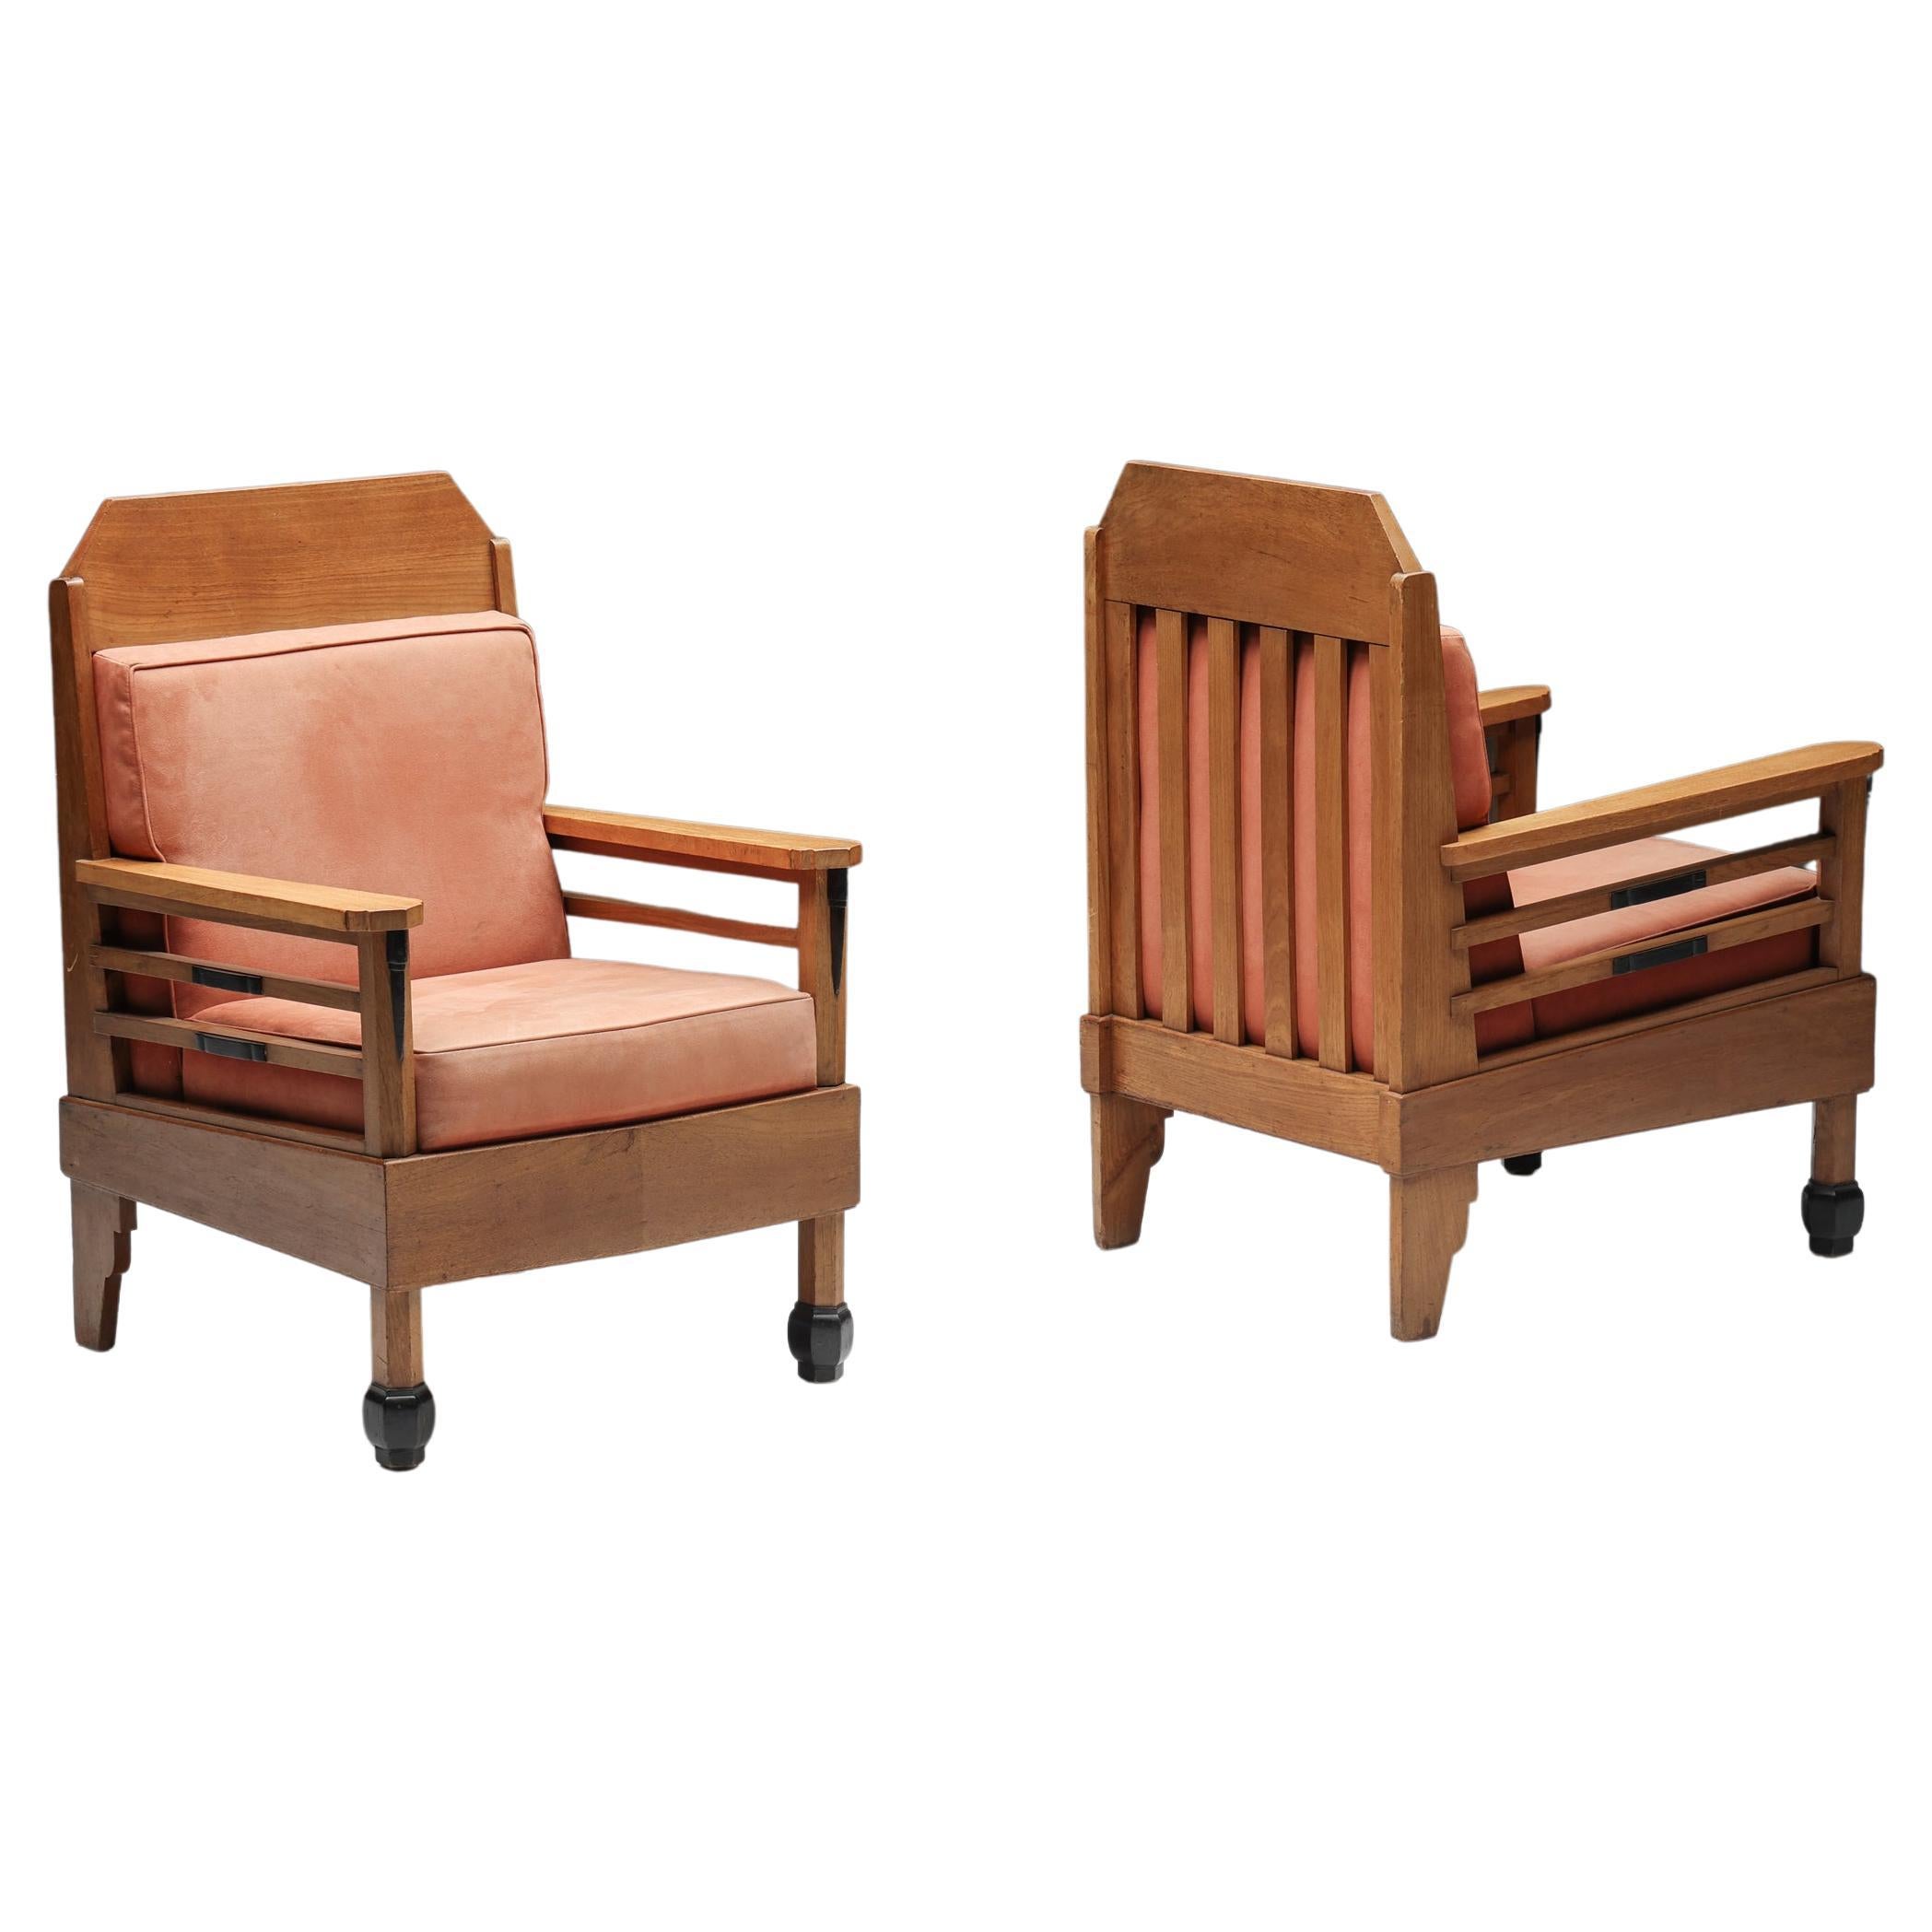 Pair of Art Deco Club Chairs, Pine & Leather, Europe, 1960s For Sale